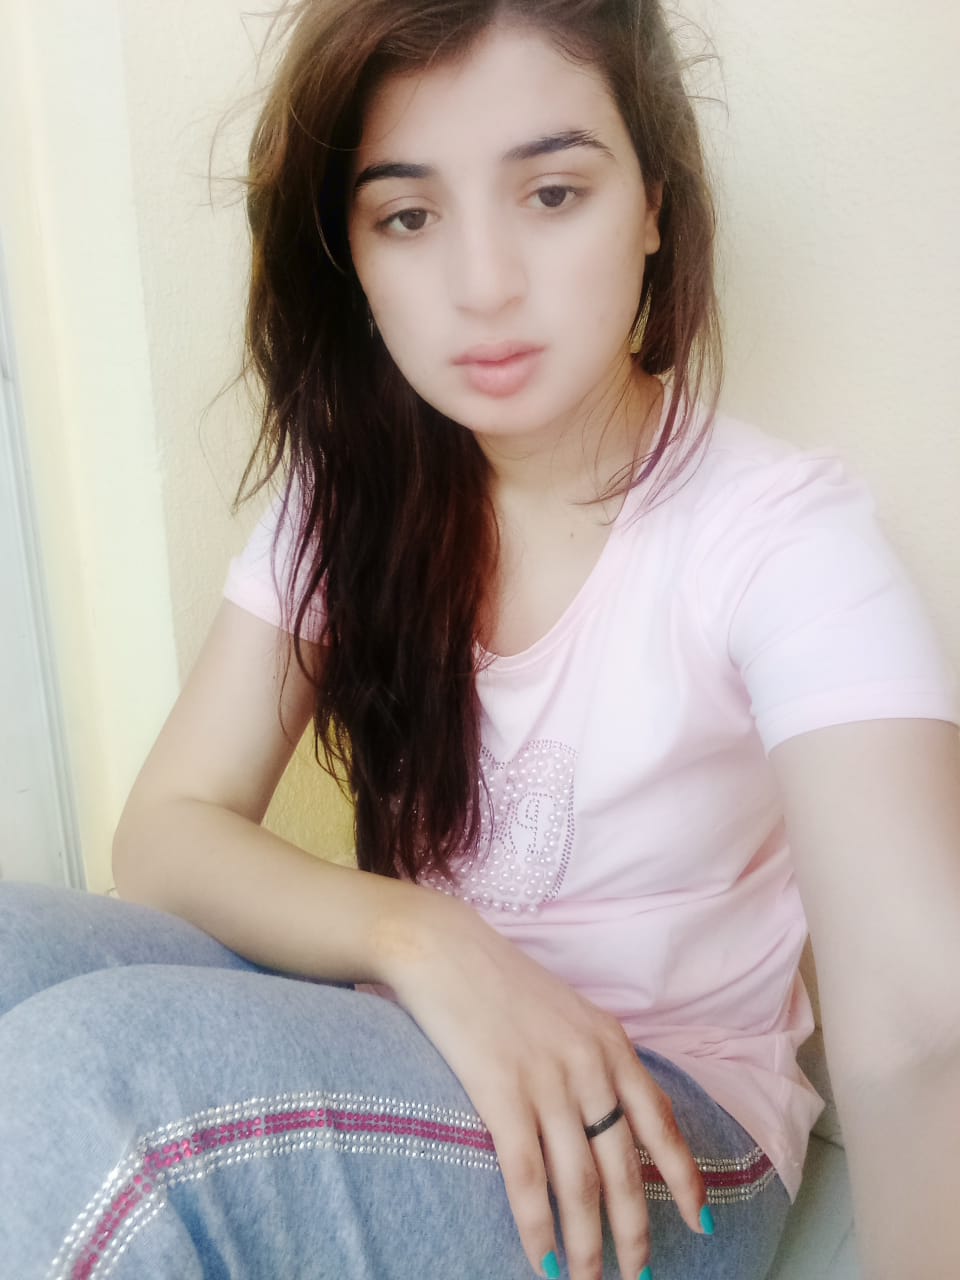 Indian Escorts in Sheikh Zayed Road	+971508049027